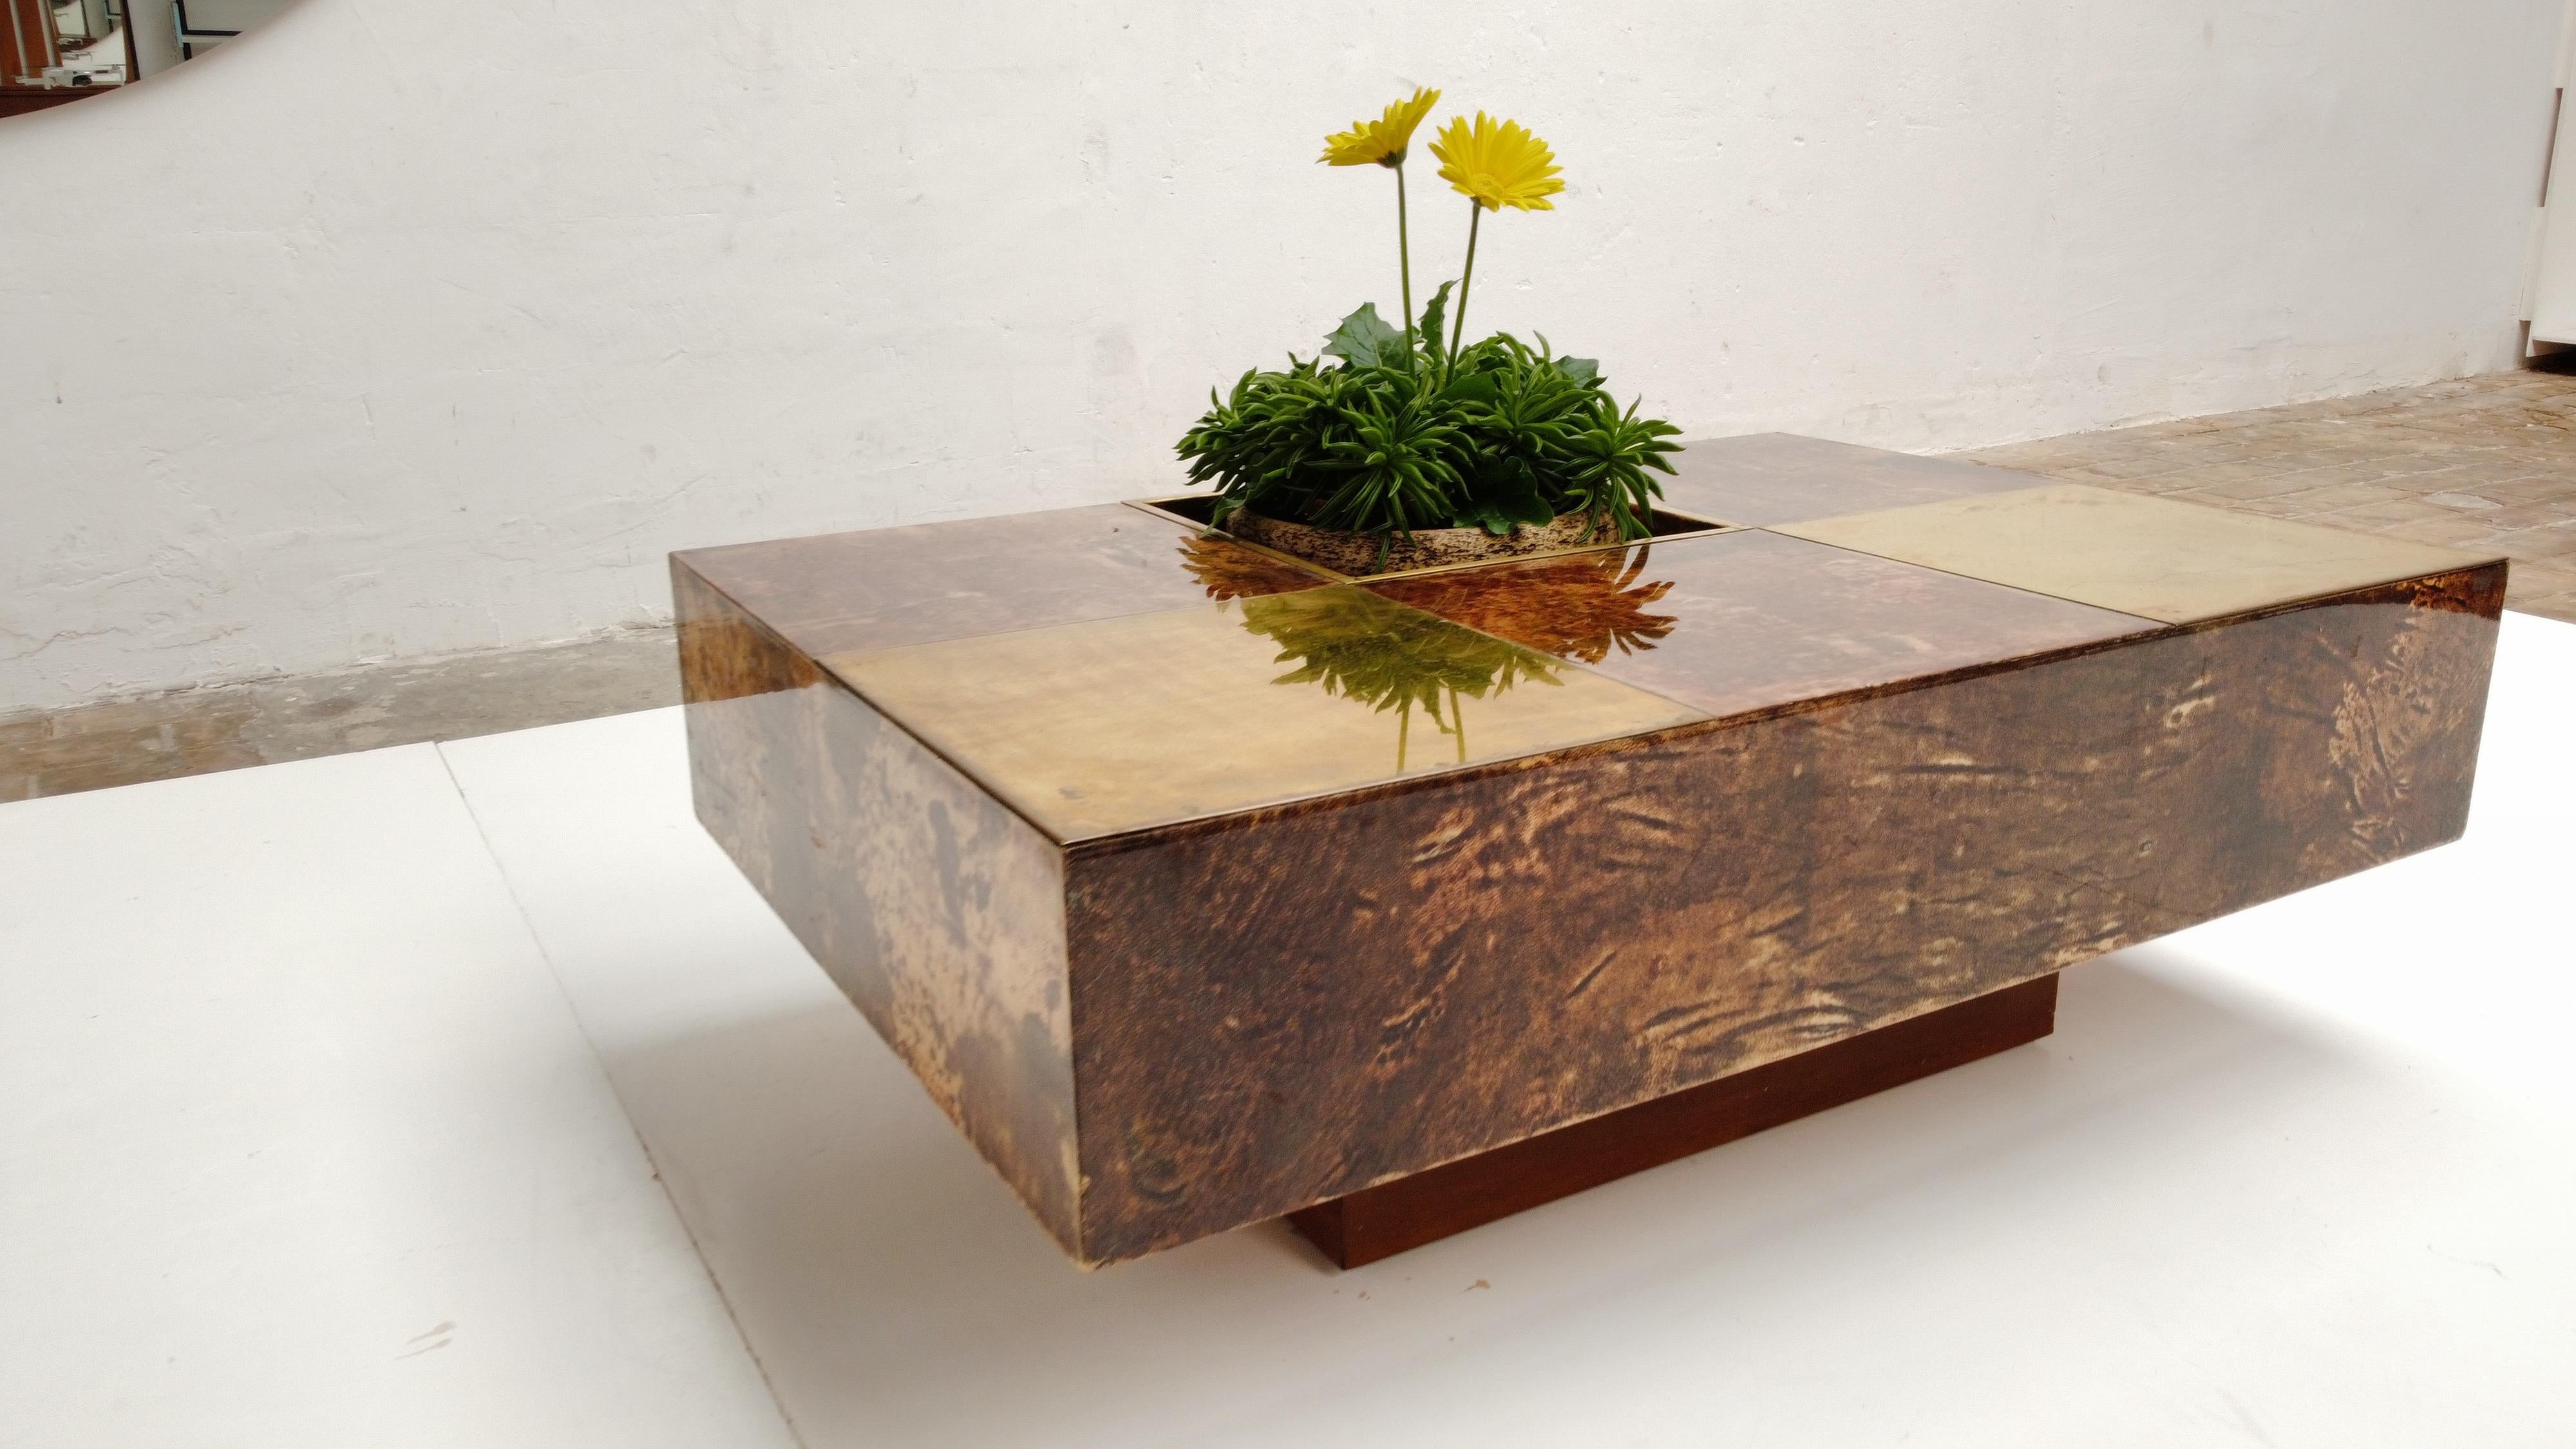 Rare and Unique Aldo Tura Goatskin Coffee Table with Brass Planter Italy 1960's For Sale 2